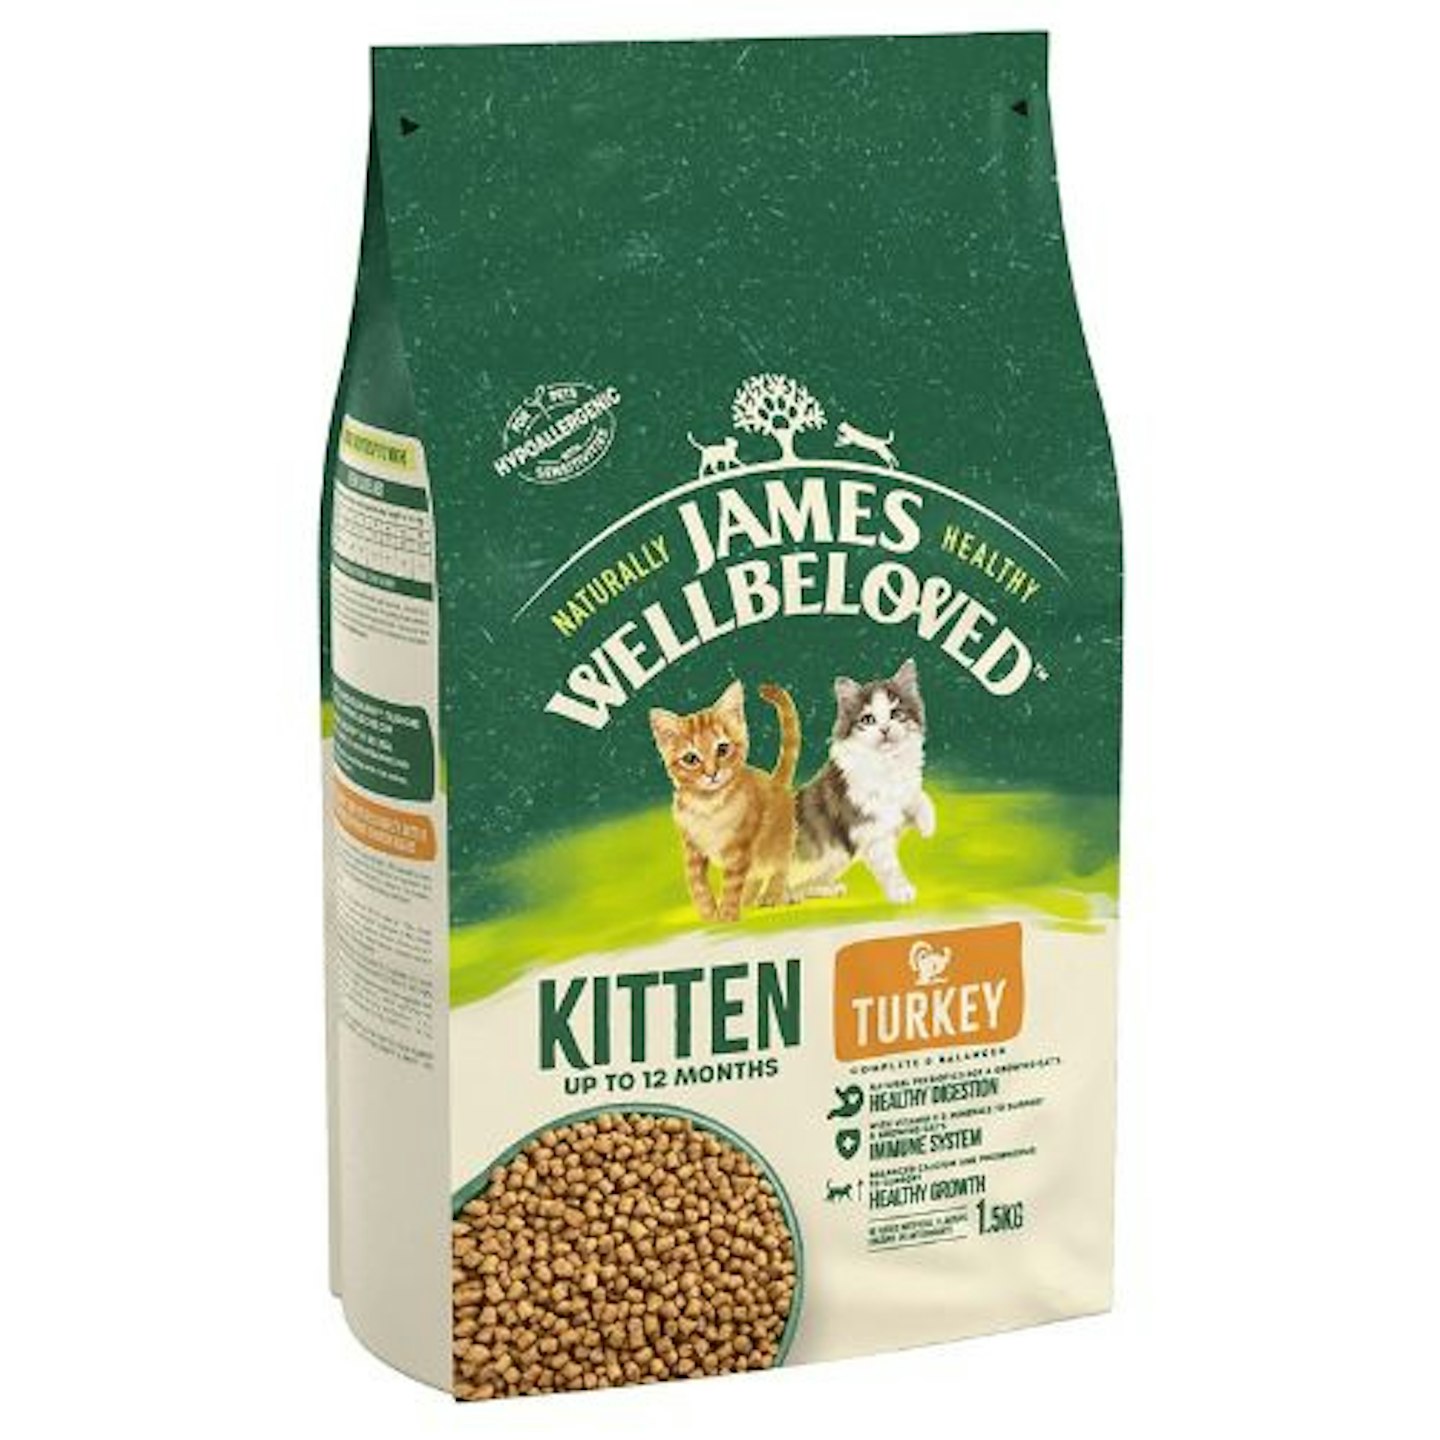 James Wellbeloved Complete Hypoallergenic Dry Cat Food for Kittens